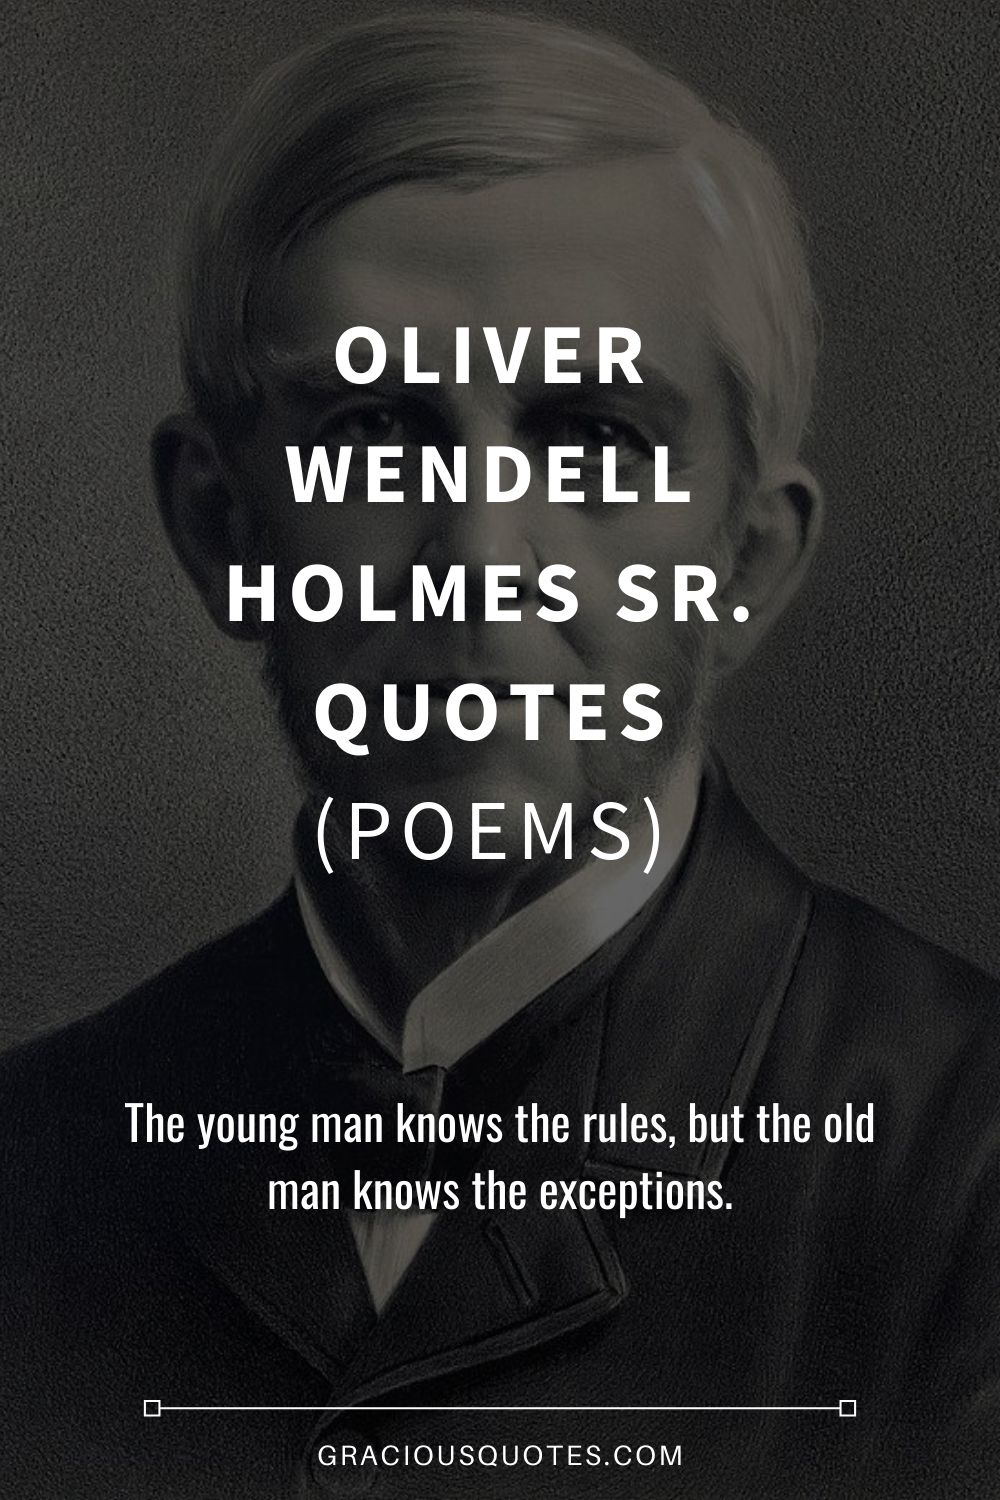 oliver wendell holmes famous poems